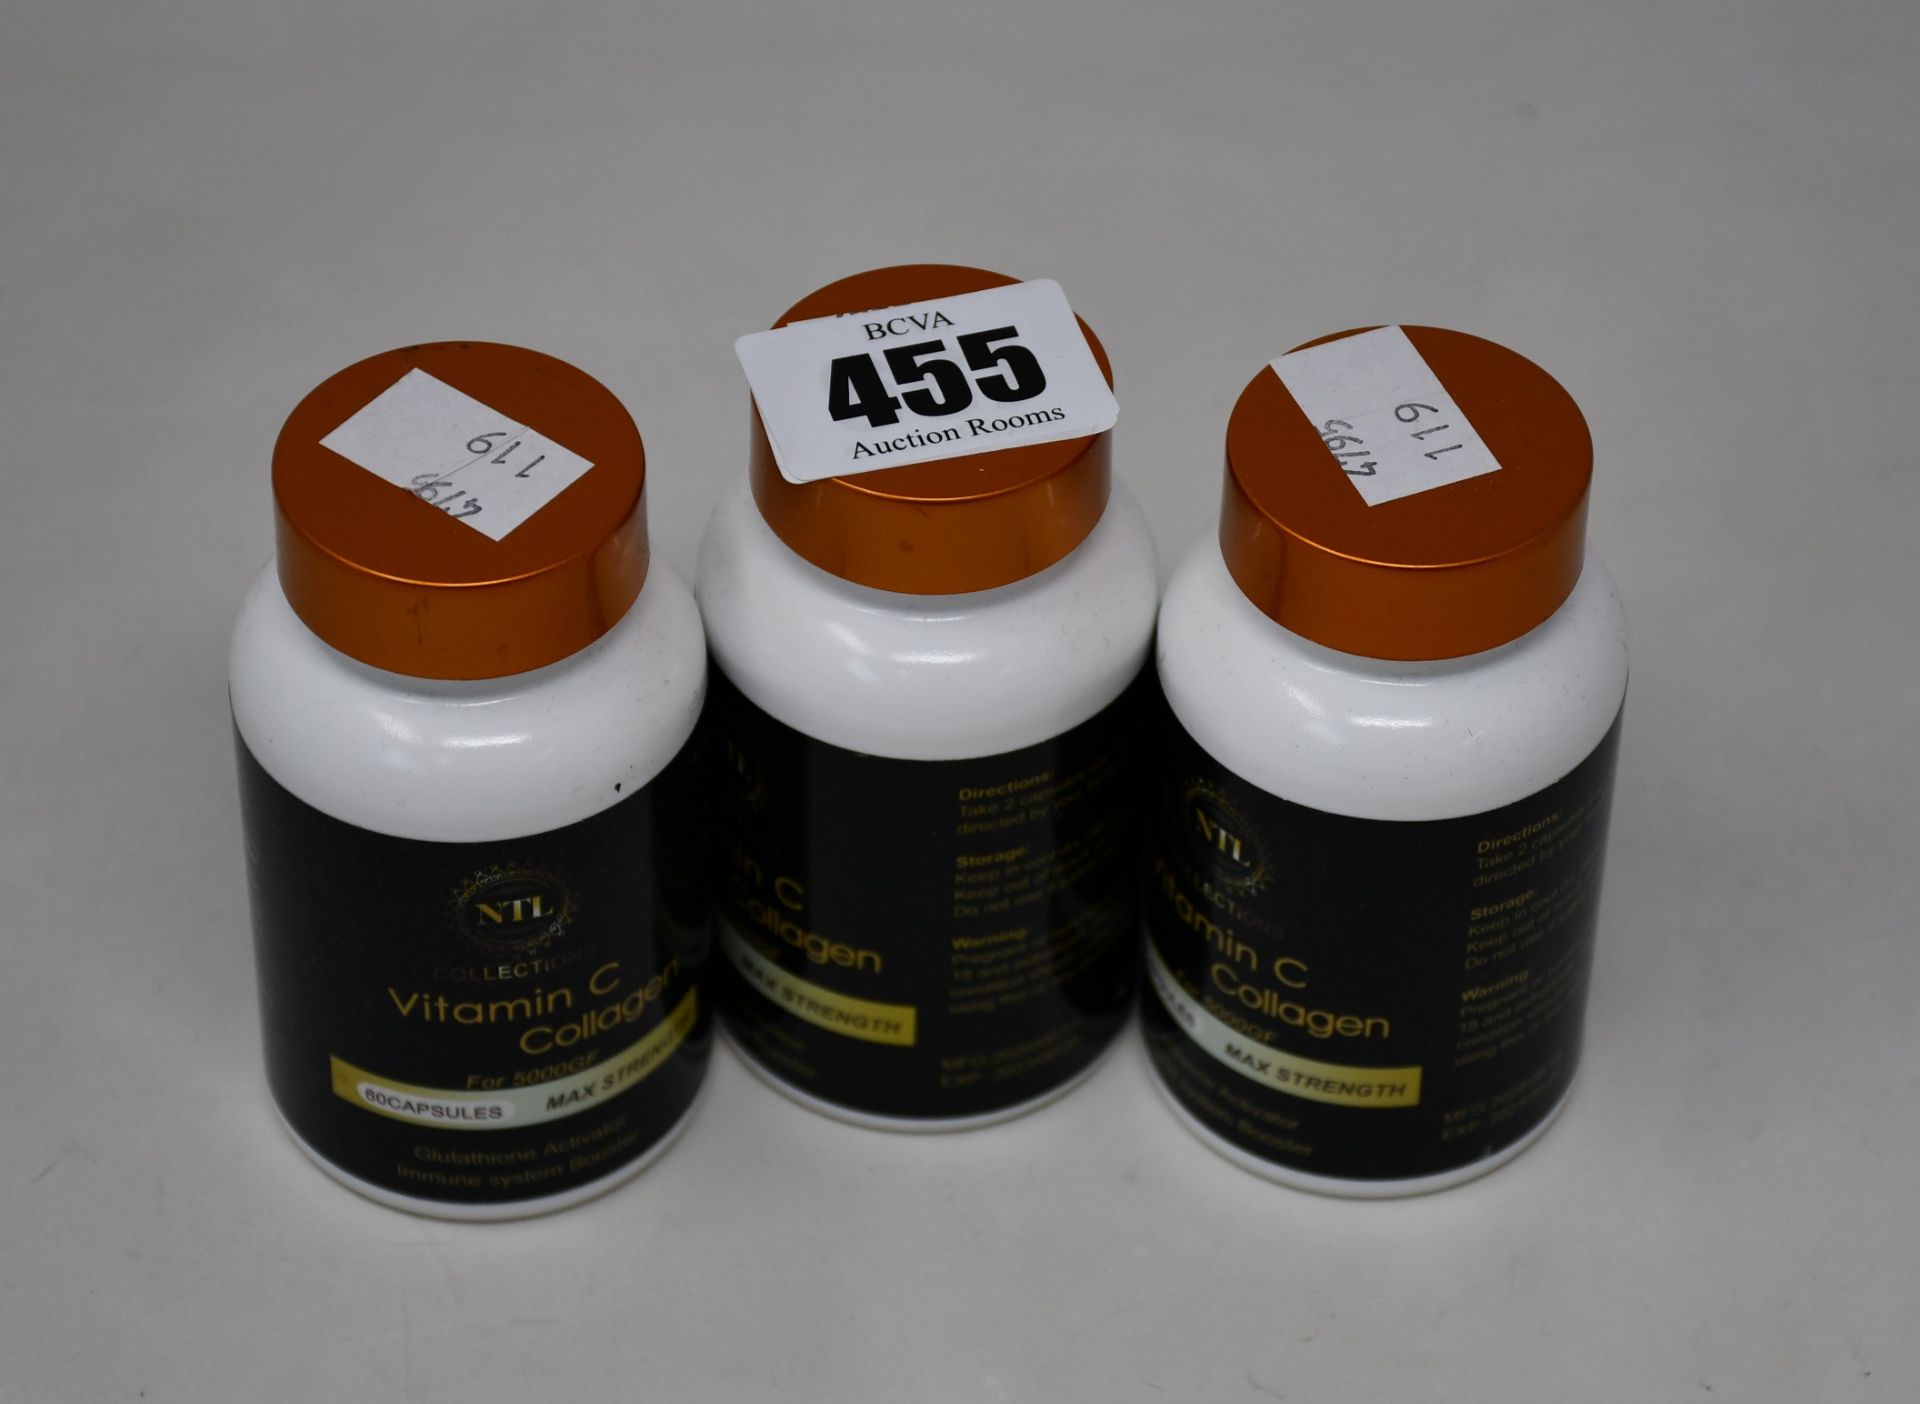 Eight NTL Collections vitamin C collagen food supplements capsules and four boxed NTL Collection